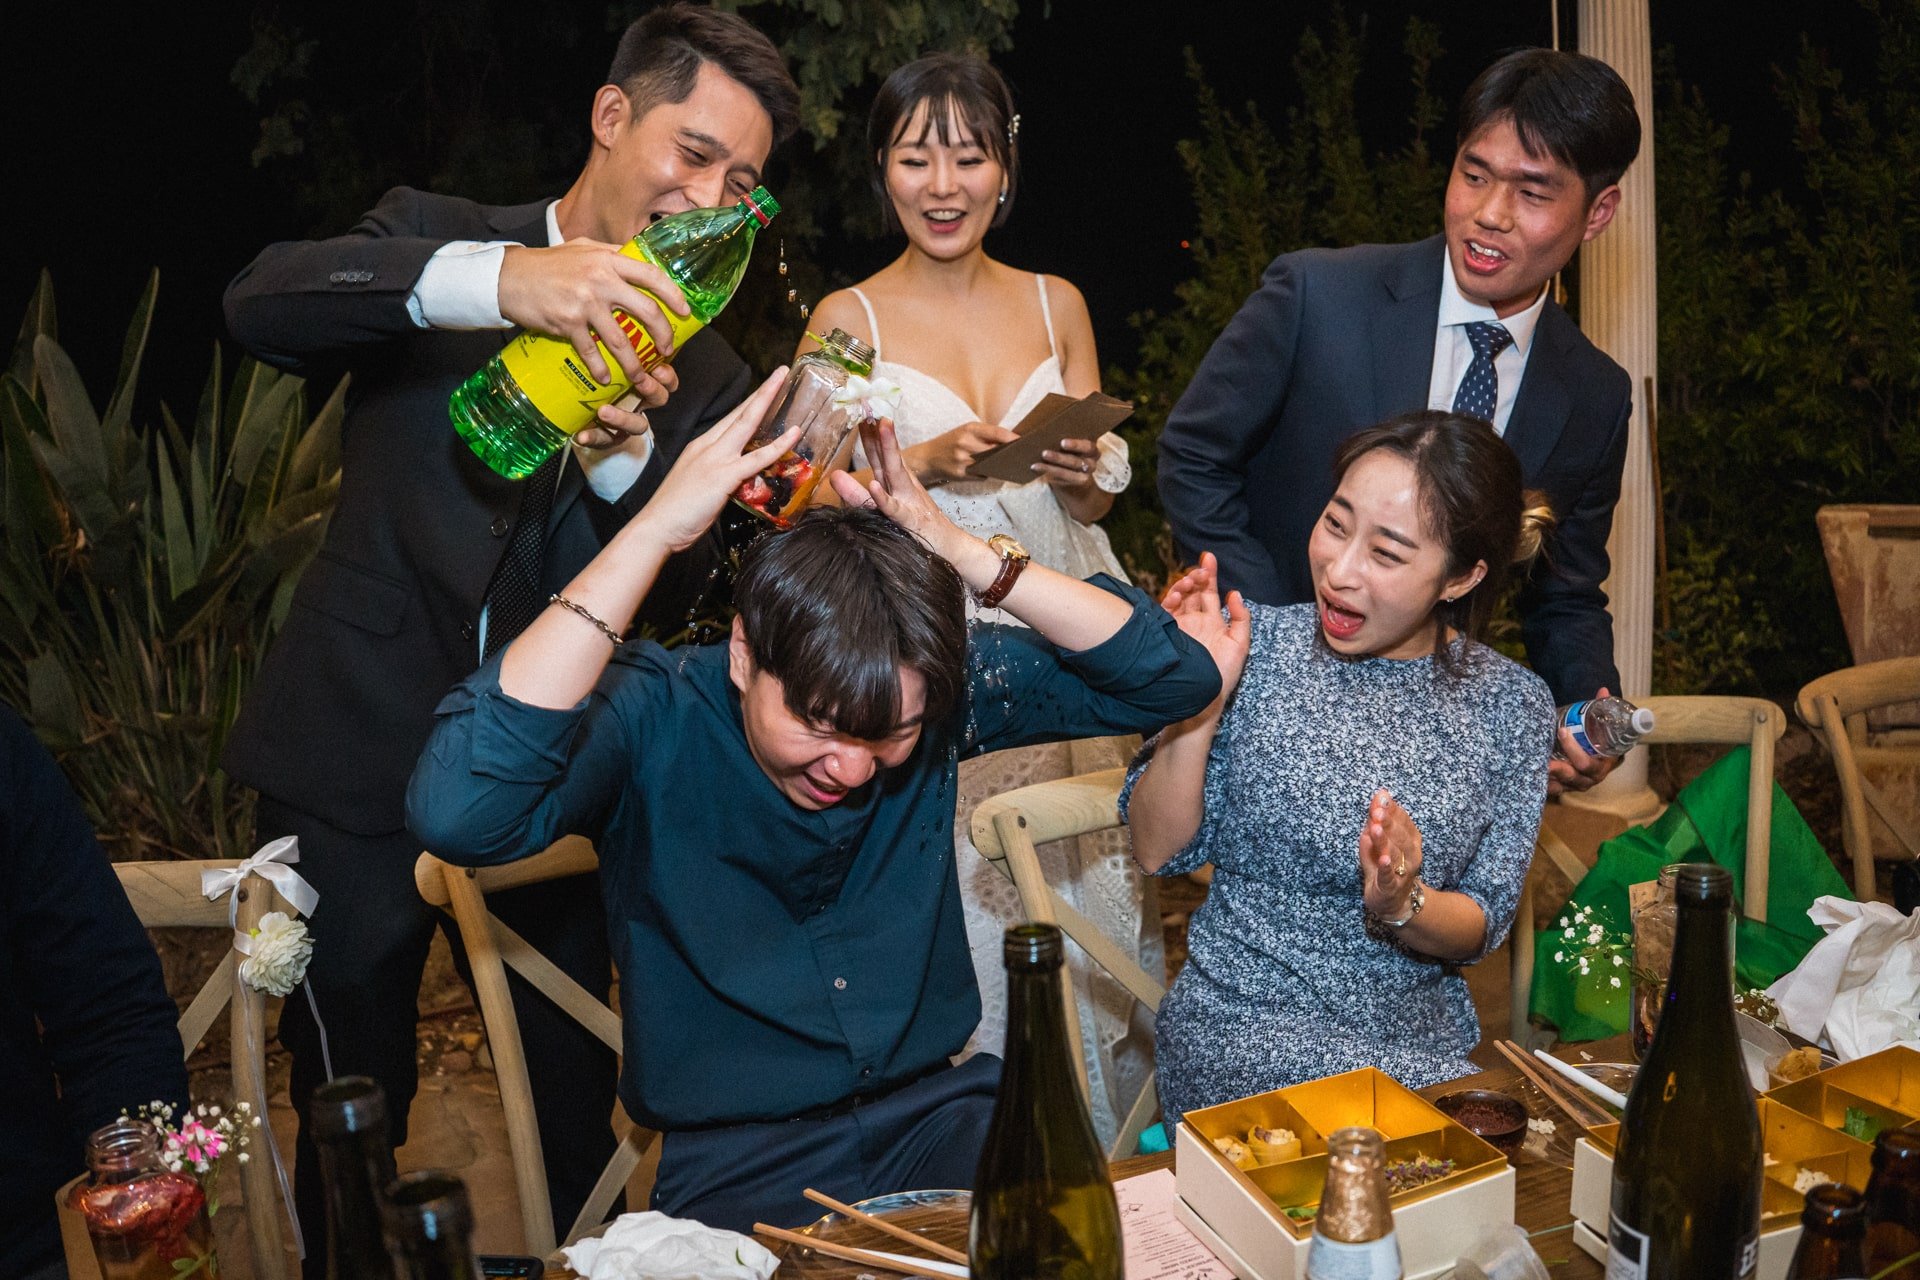 Unique and Hilarious Photography for Wedding Parties